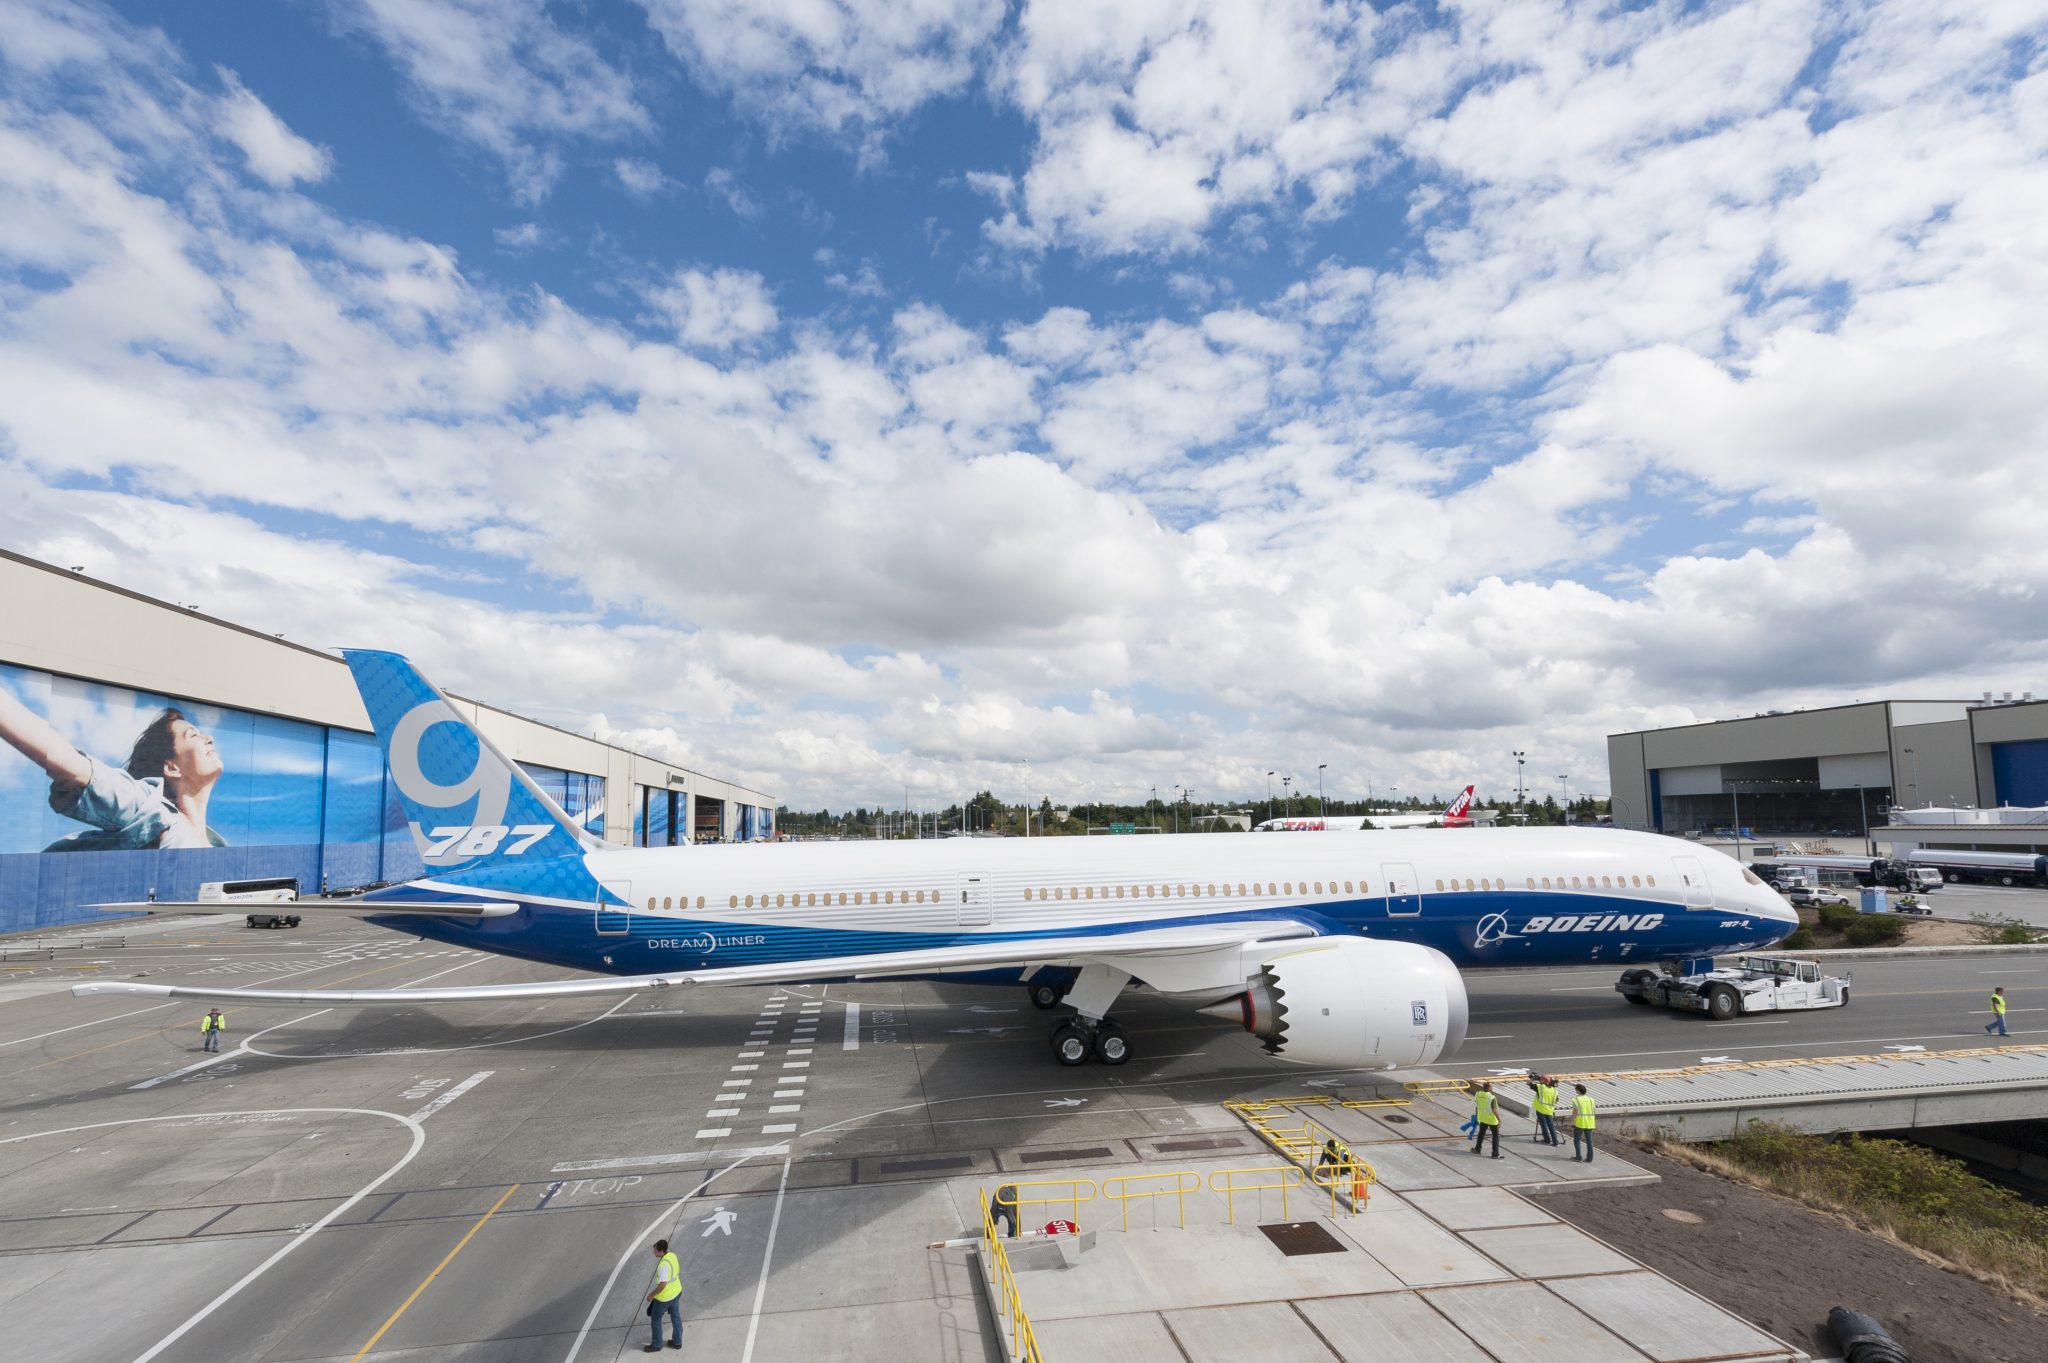 LOT to take delivery of its first 787-9